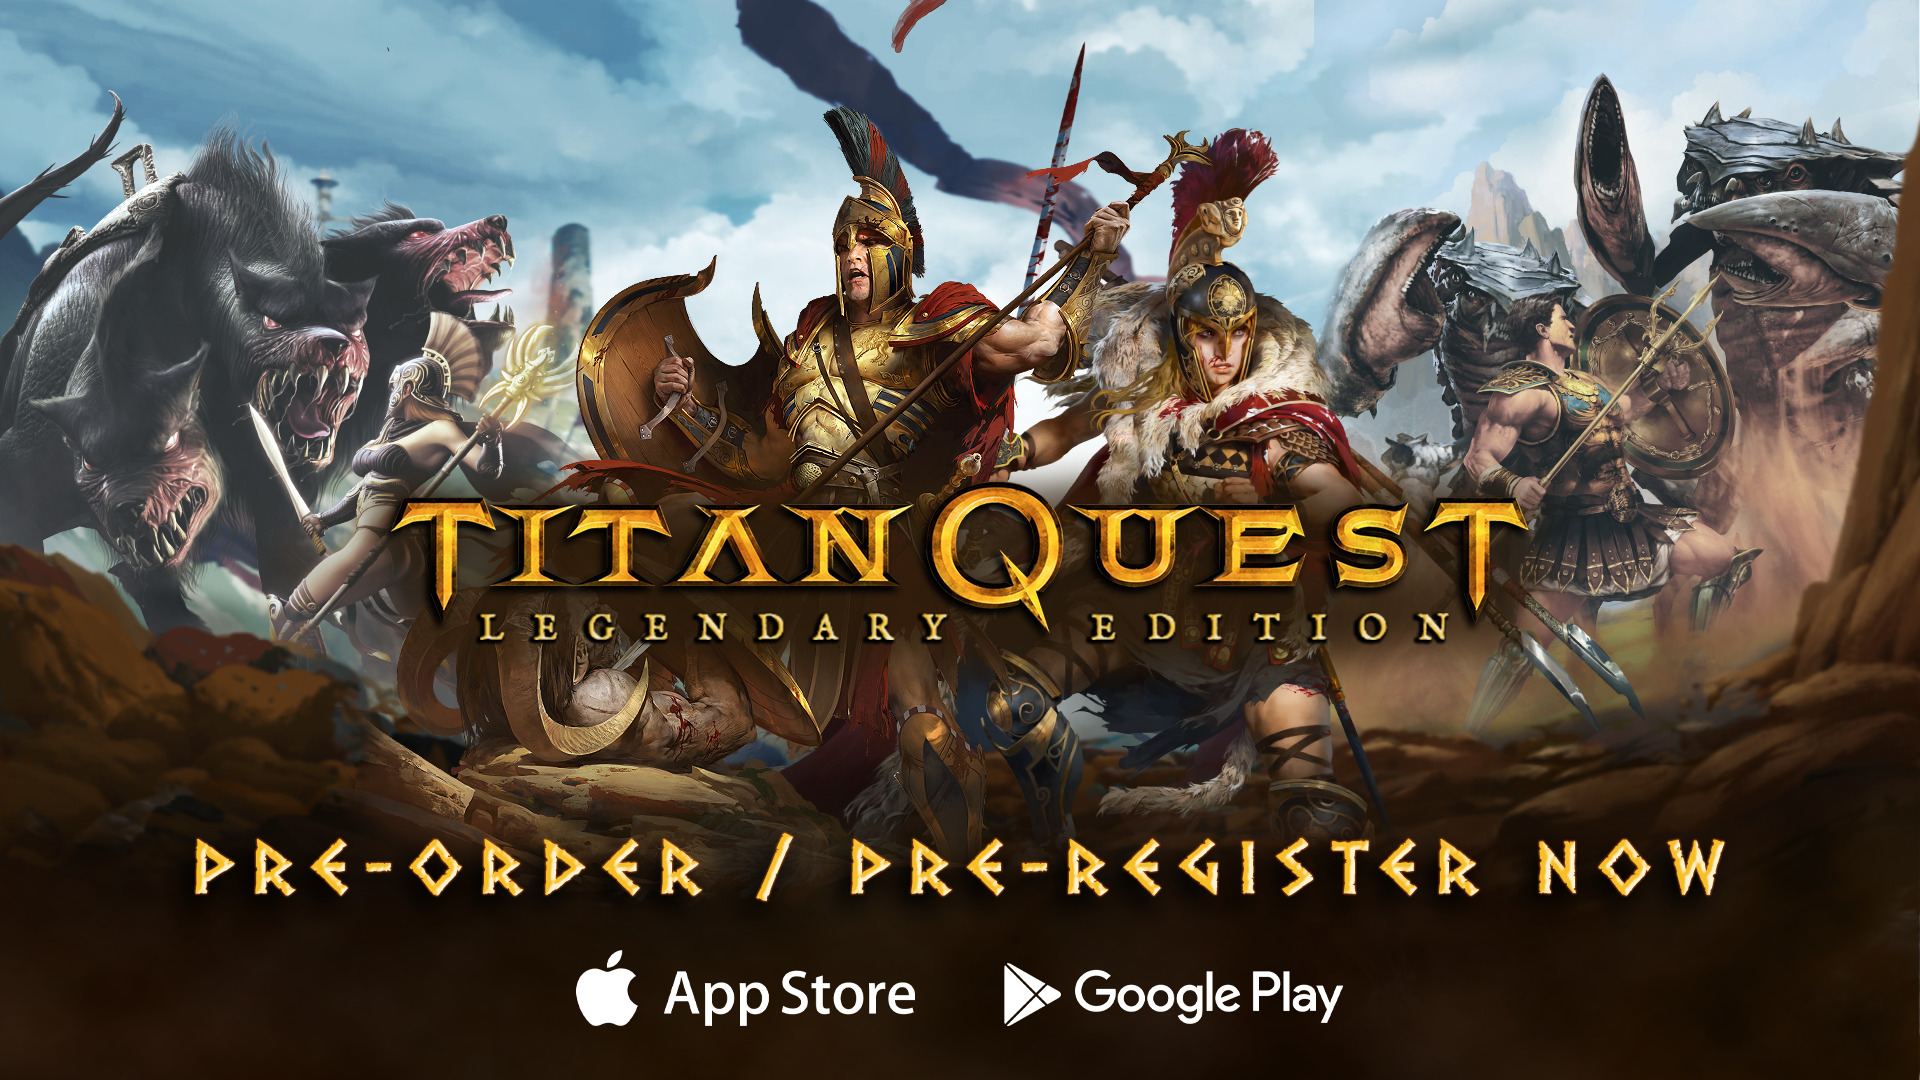 Titan Quest - Apps on Google Play